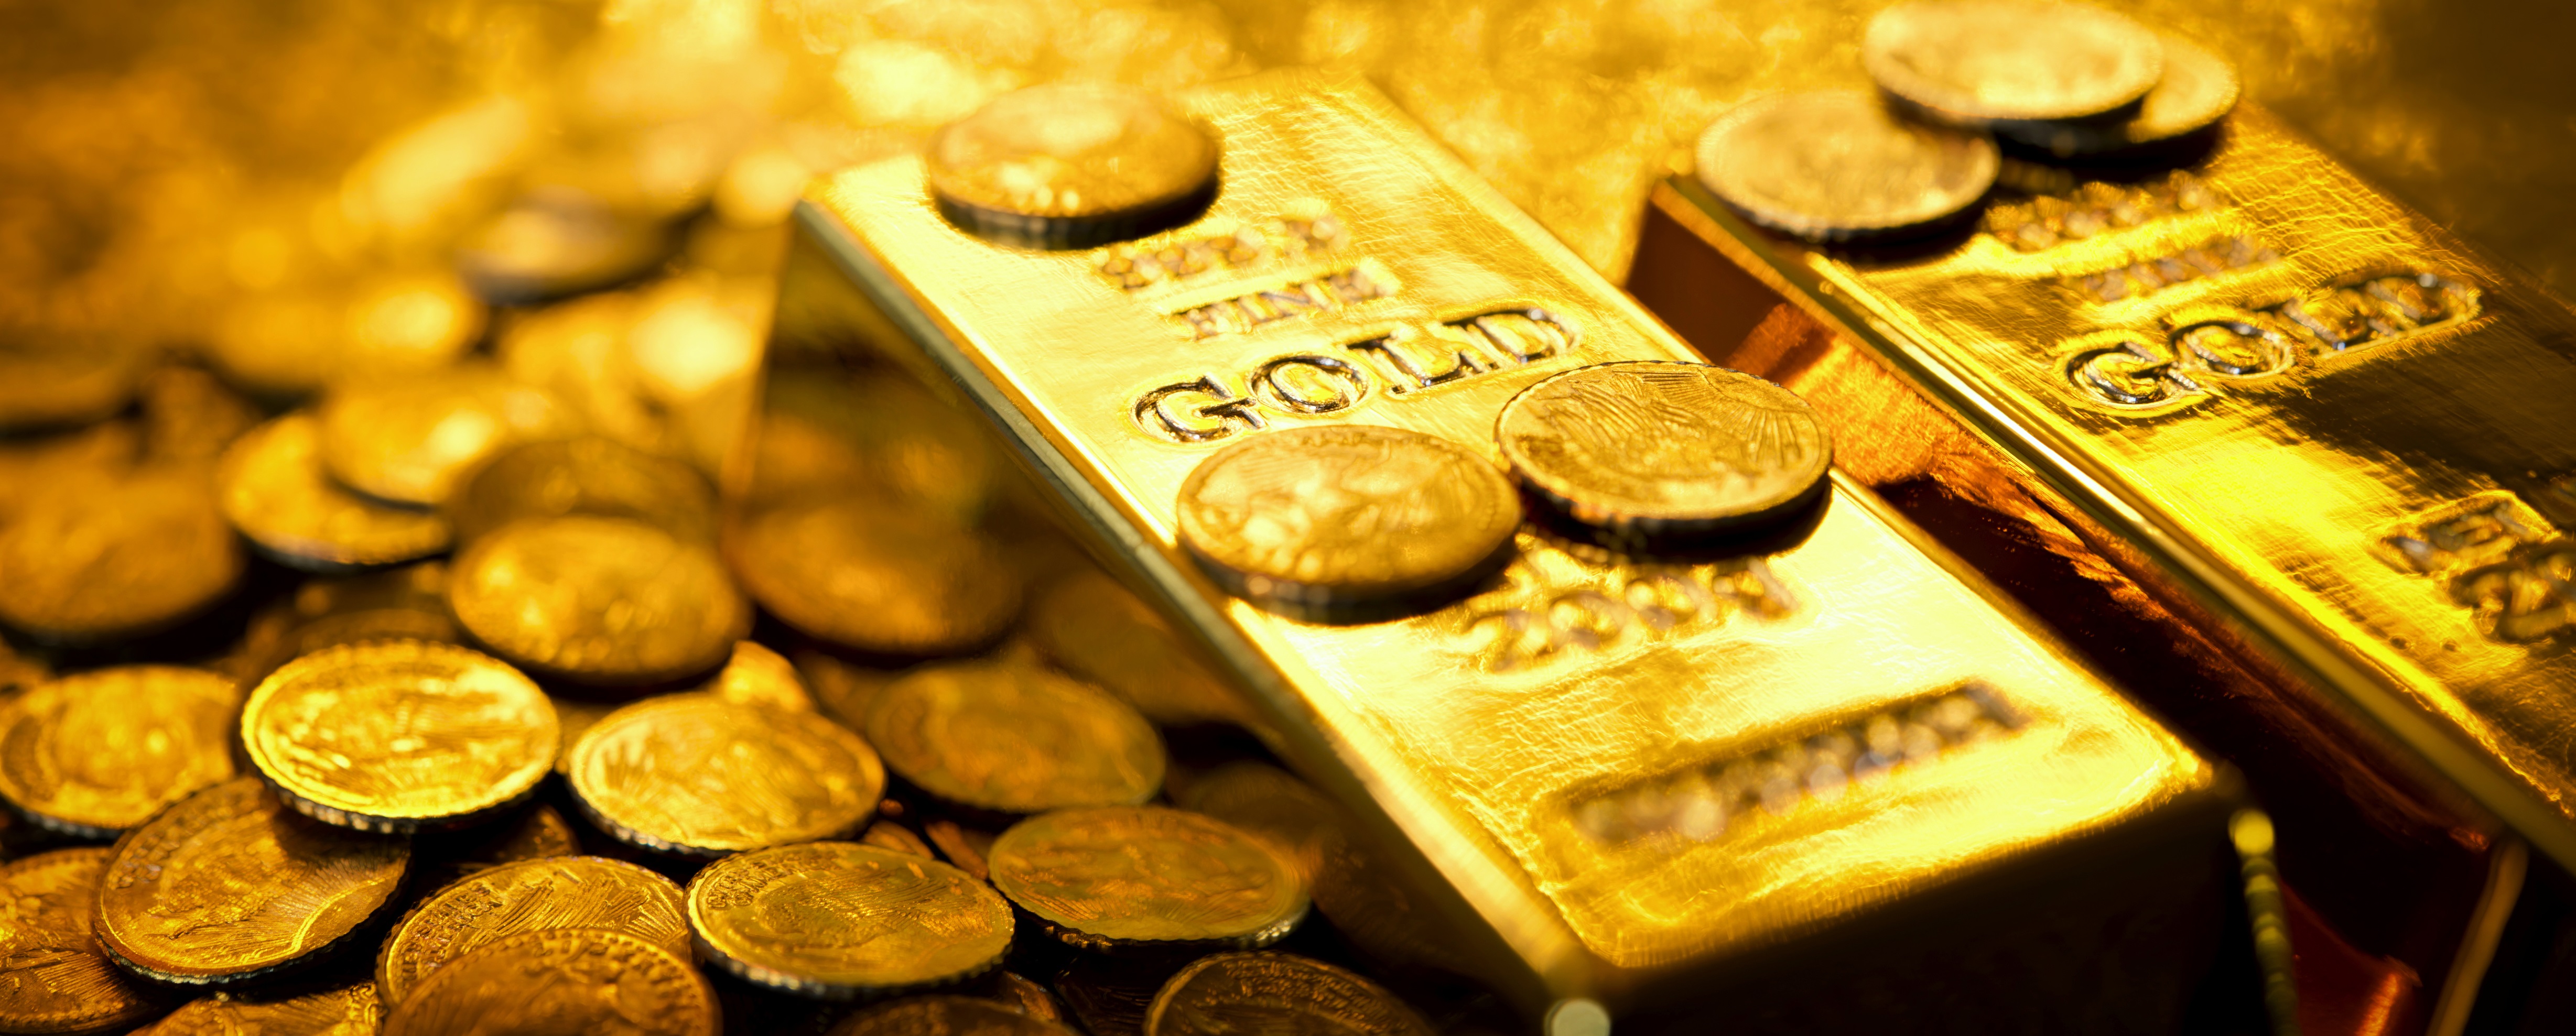 Gold Worth Rs 3 Crore Looted In Chhattisgarh